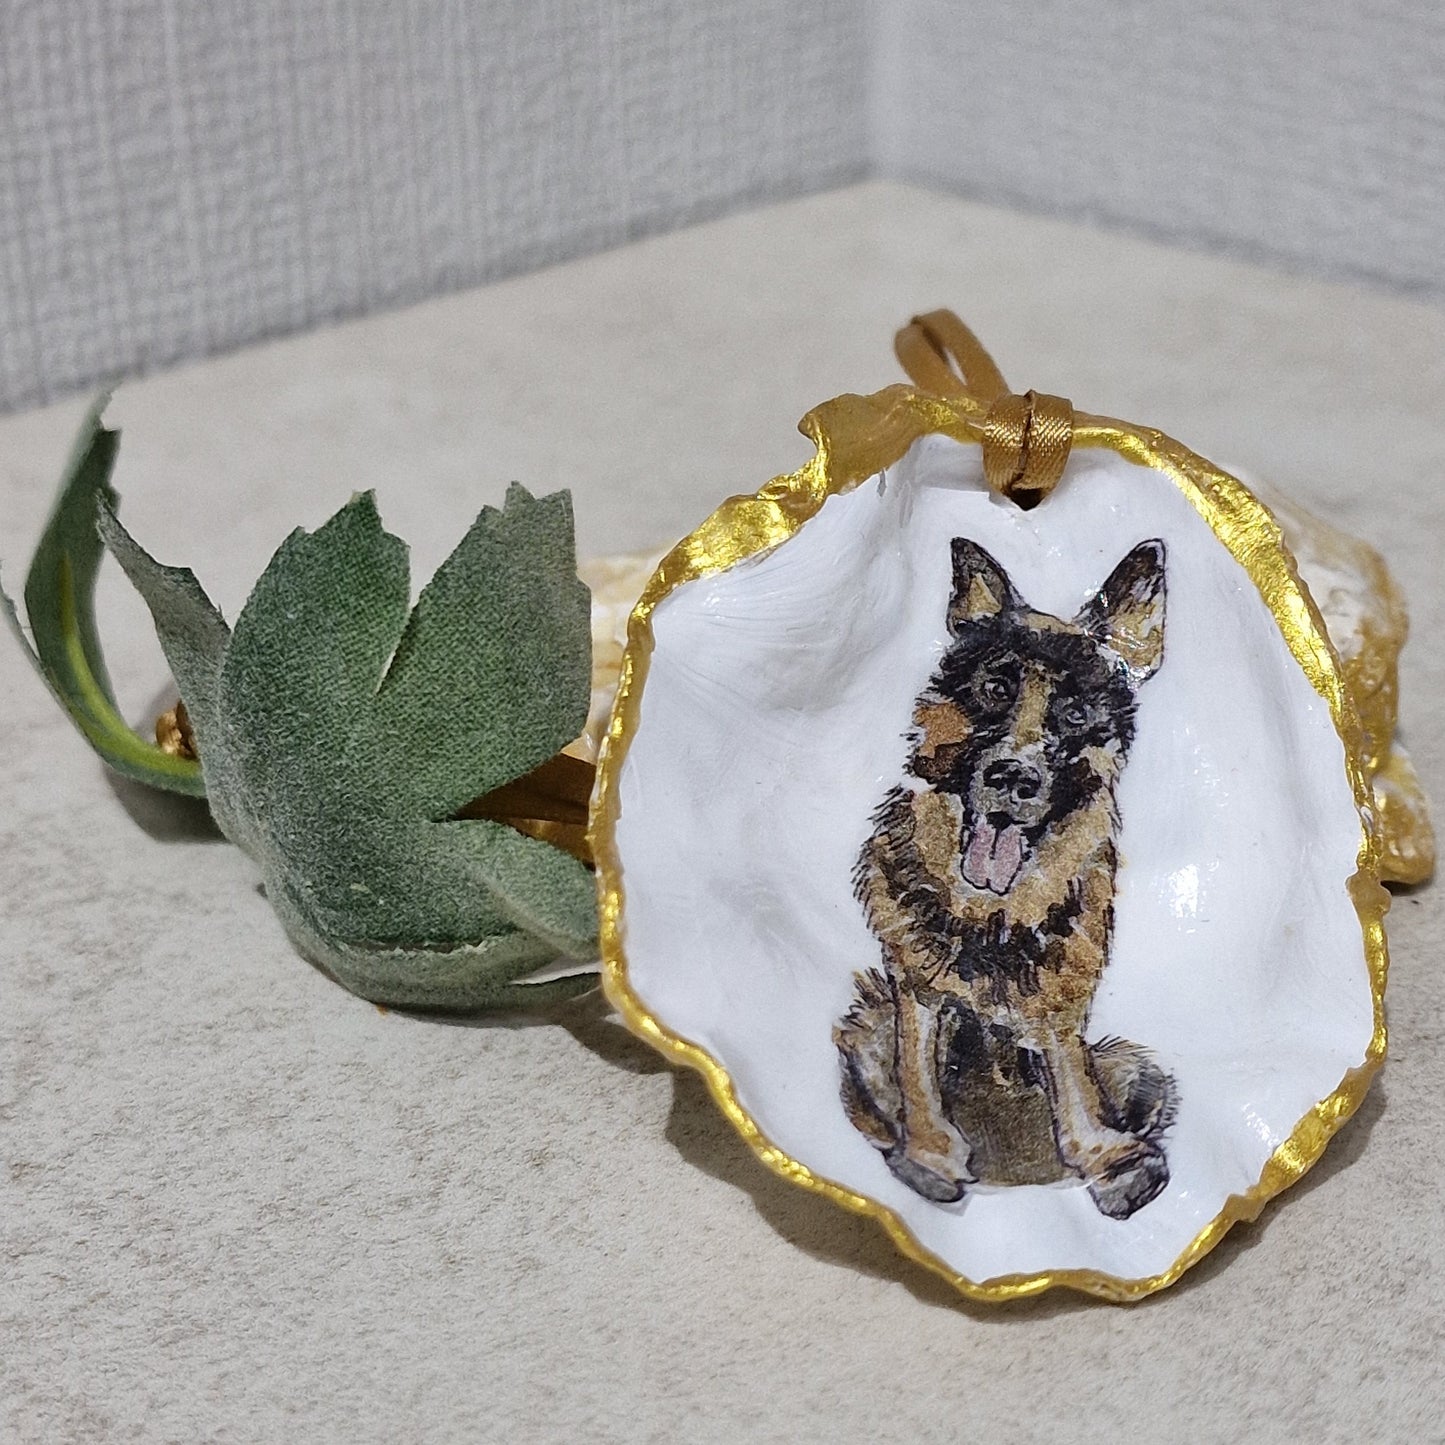 NEW Alsatian Oyster Shell Hanging Ornaments Decoration Gift